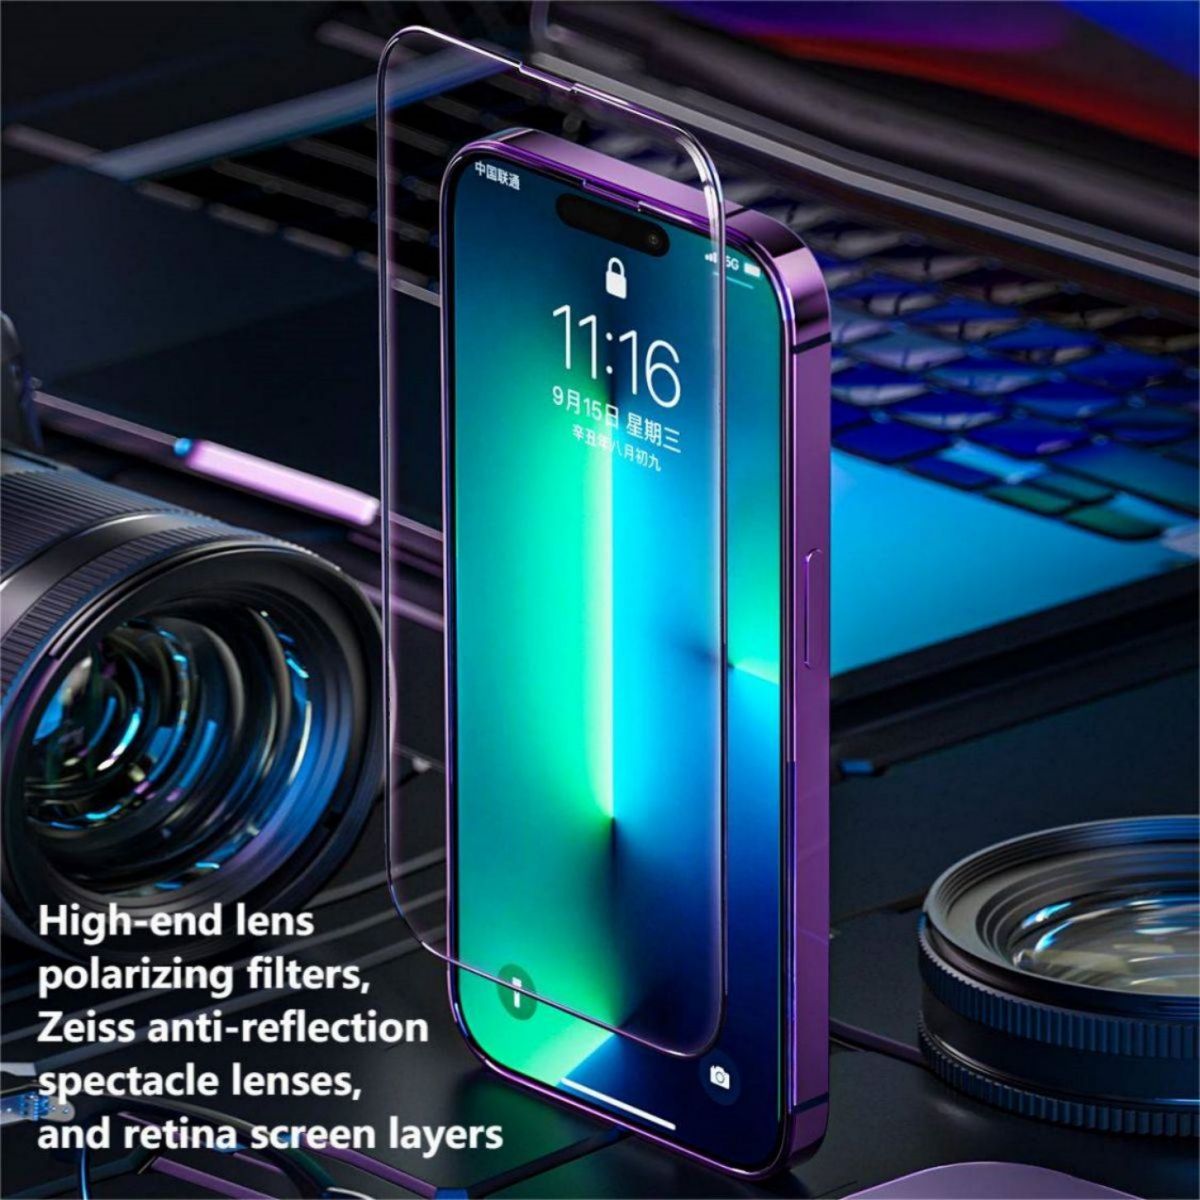 WEKOME 9D Gurved Privacy Tempered Glass Screen Protector WTP-082 - Hugmie